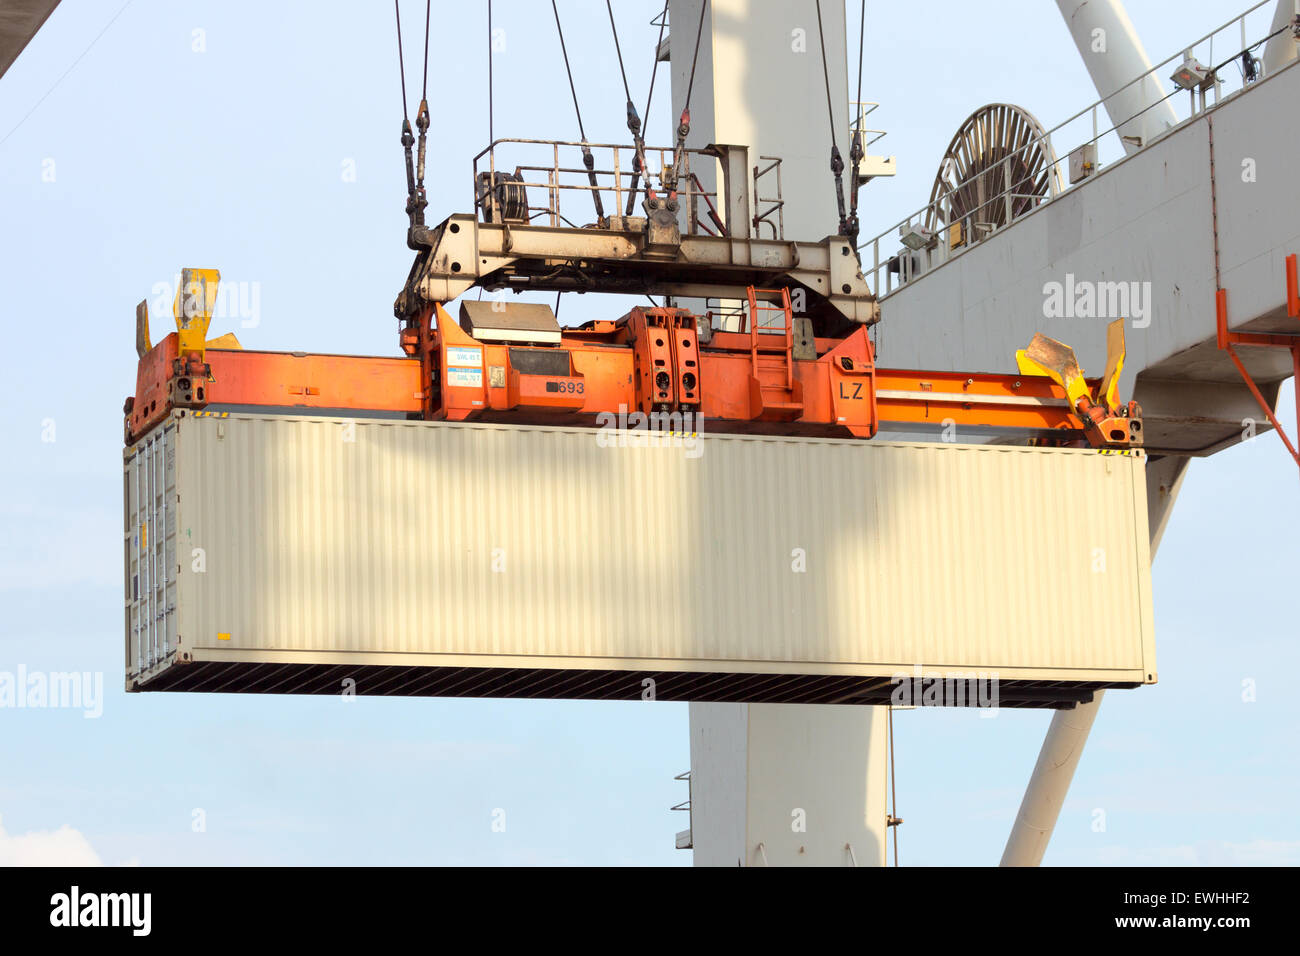 Sea container lifted by a harbor crane Stock Photo